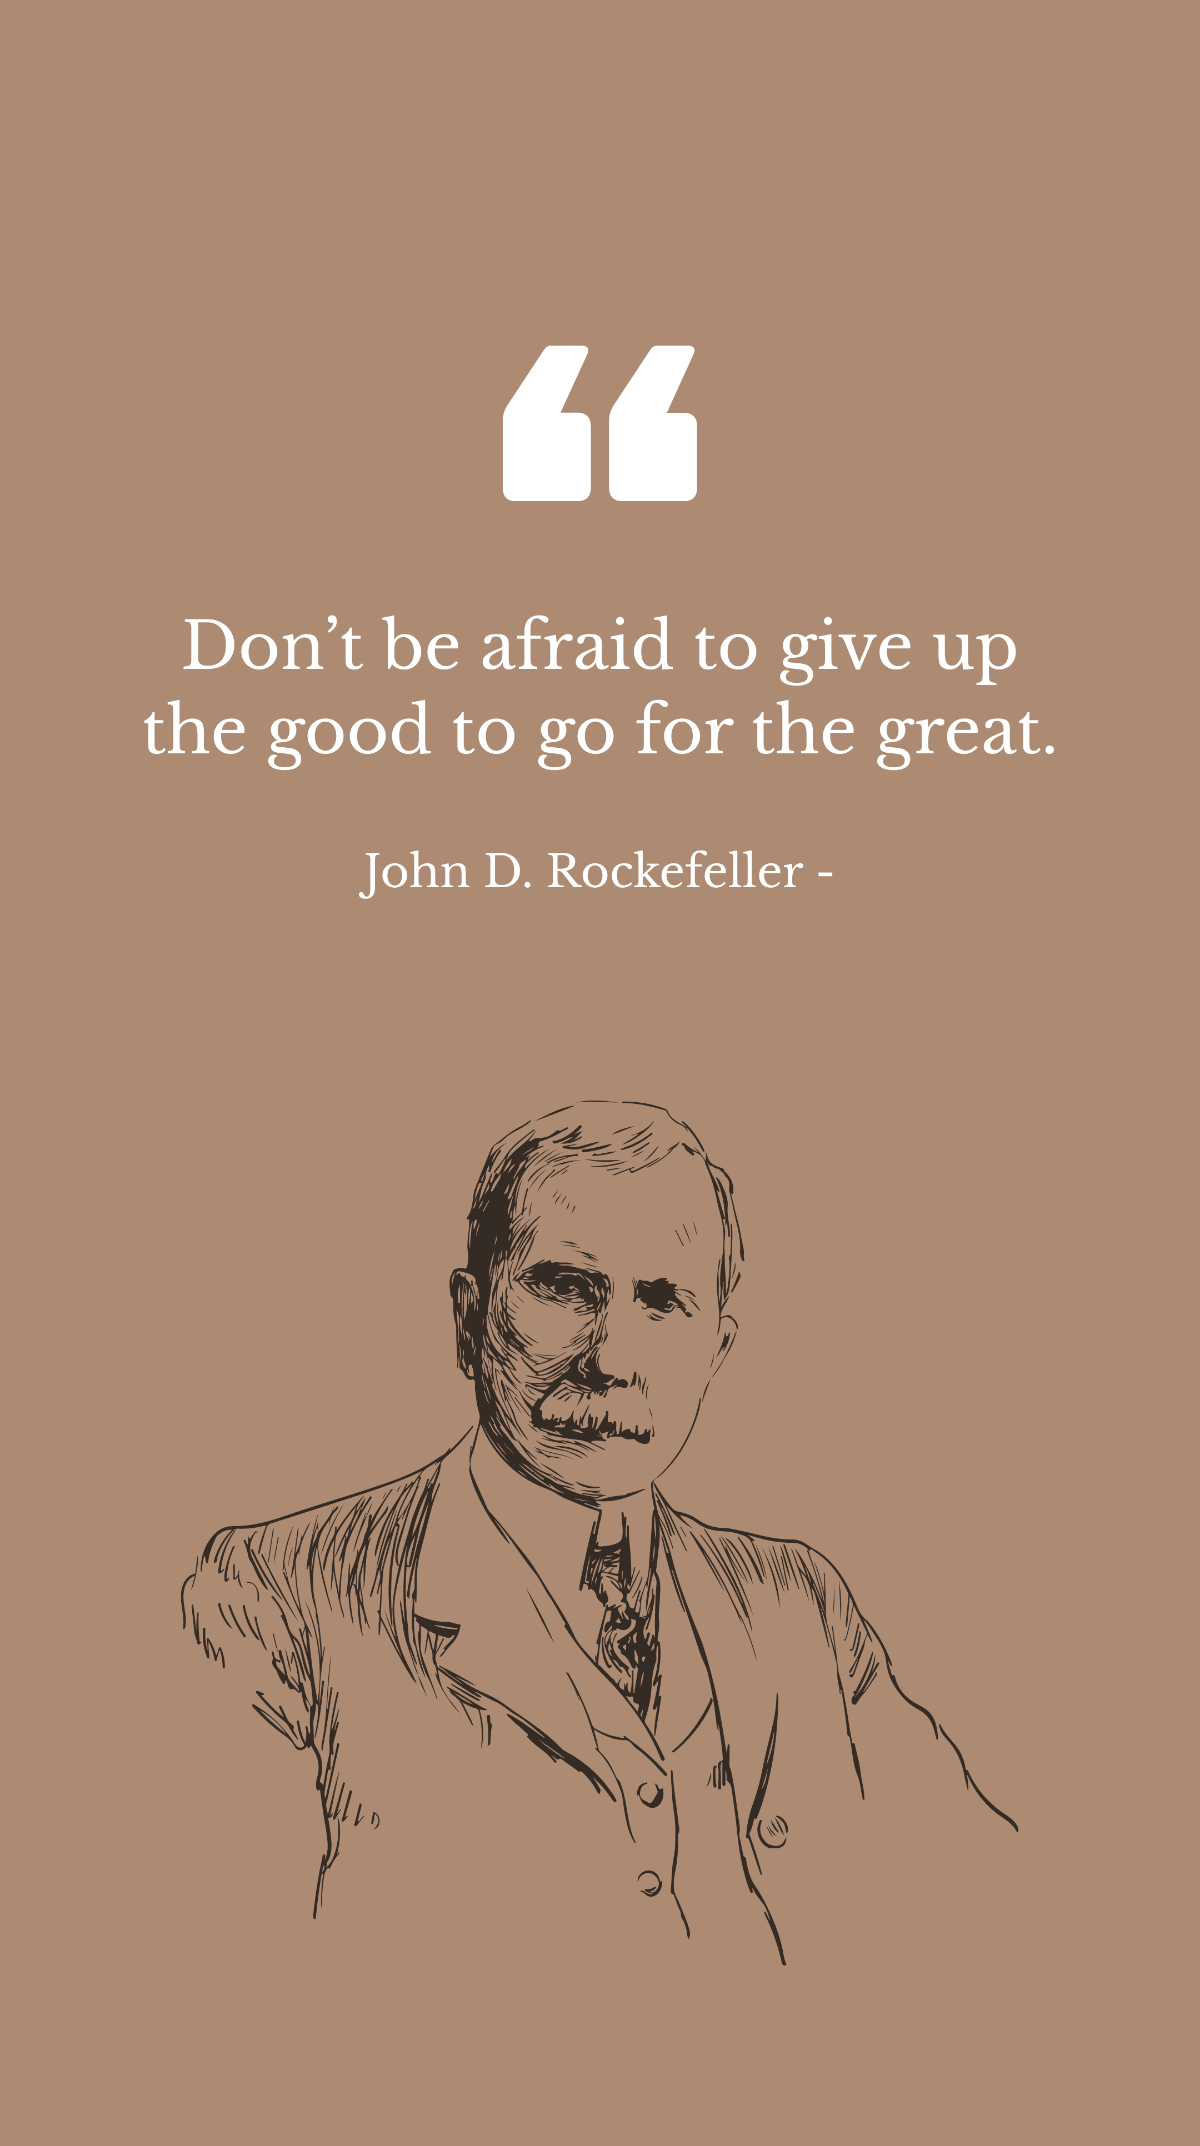 John D. Rockefeller - Don’t be afraid to give up the good to go for the great. Template